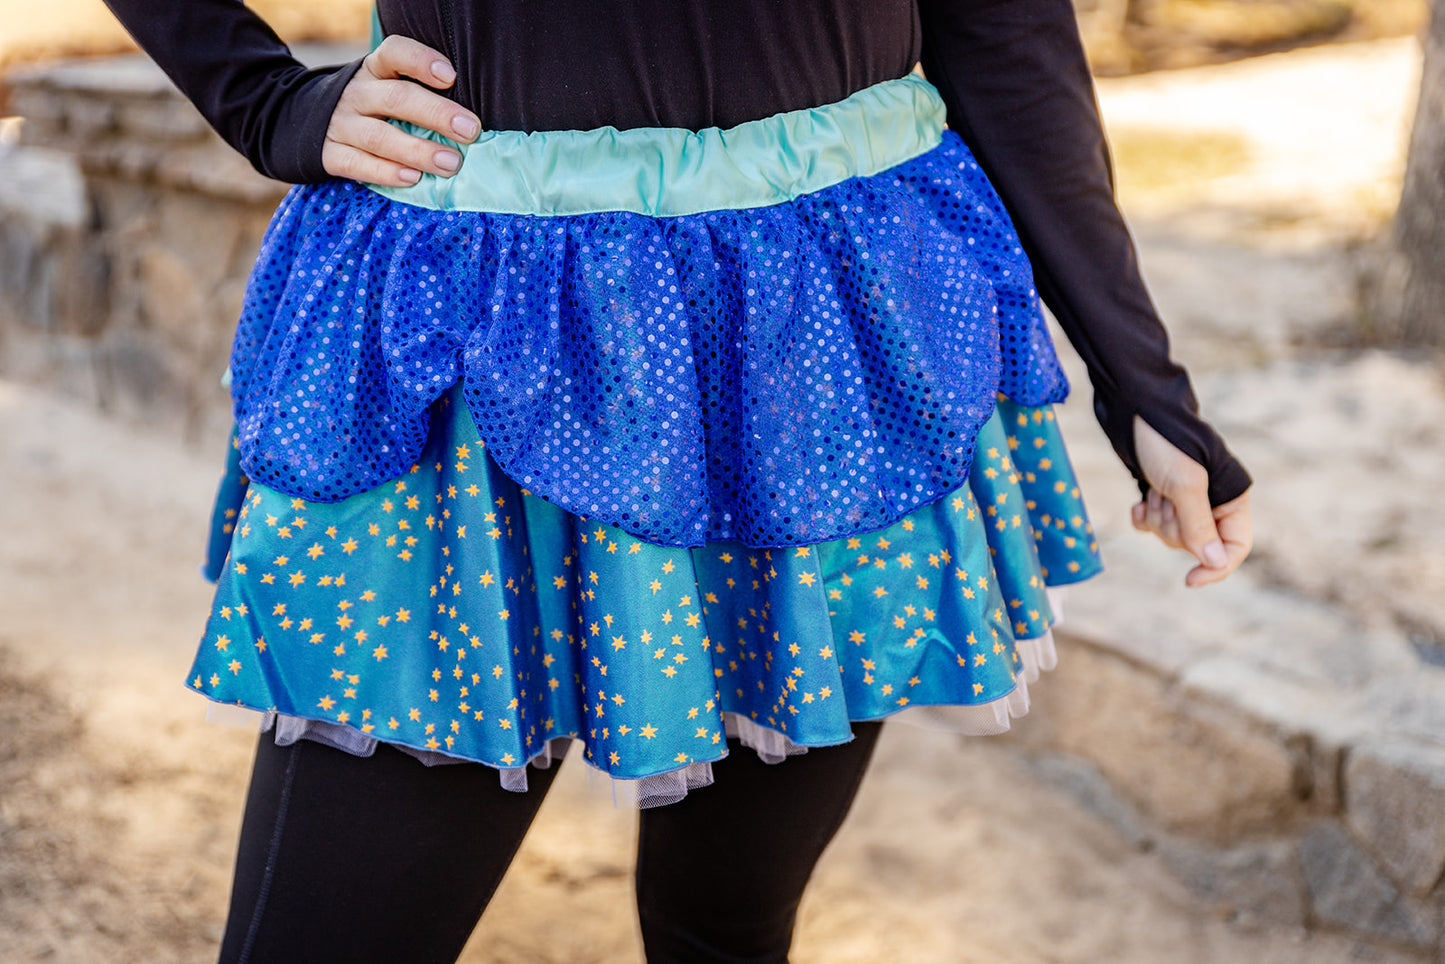 Second Star to the Right Tutu Running Skirt